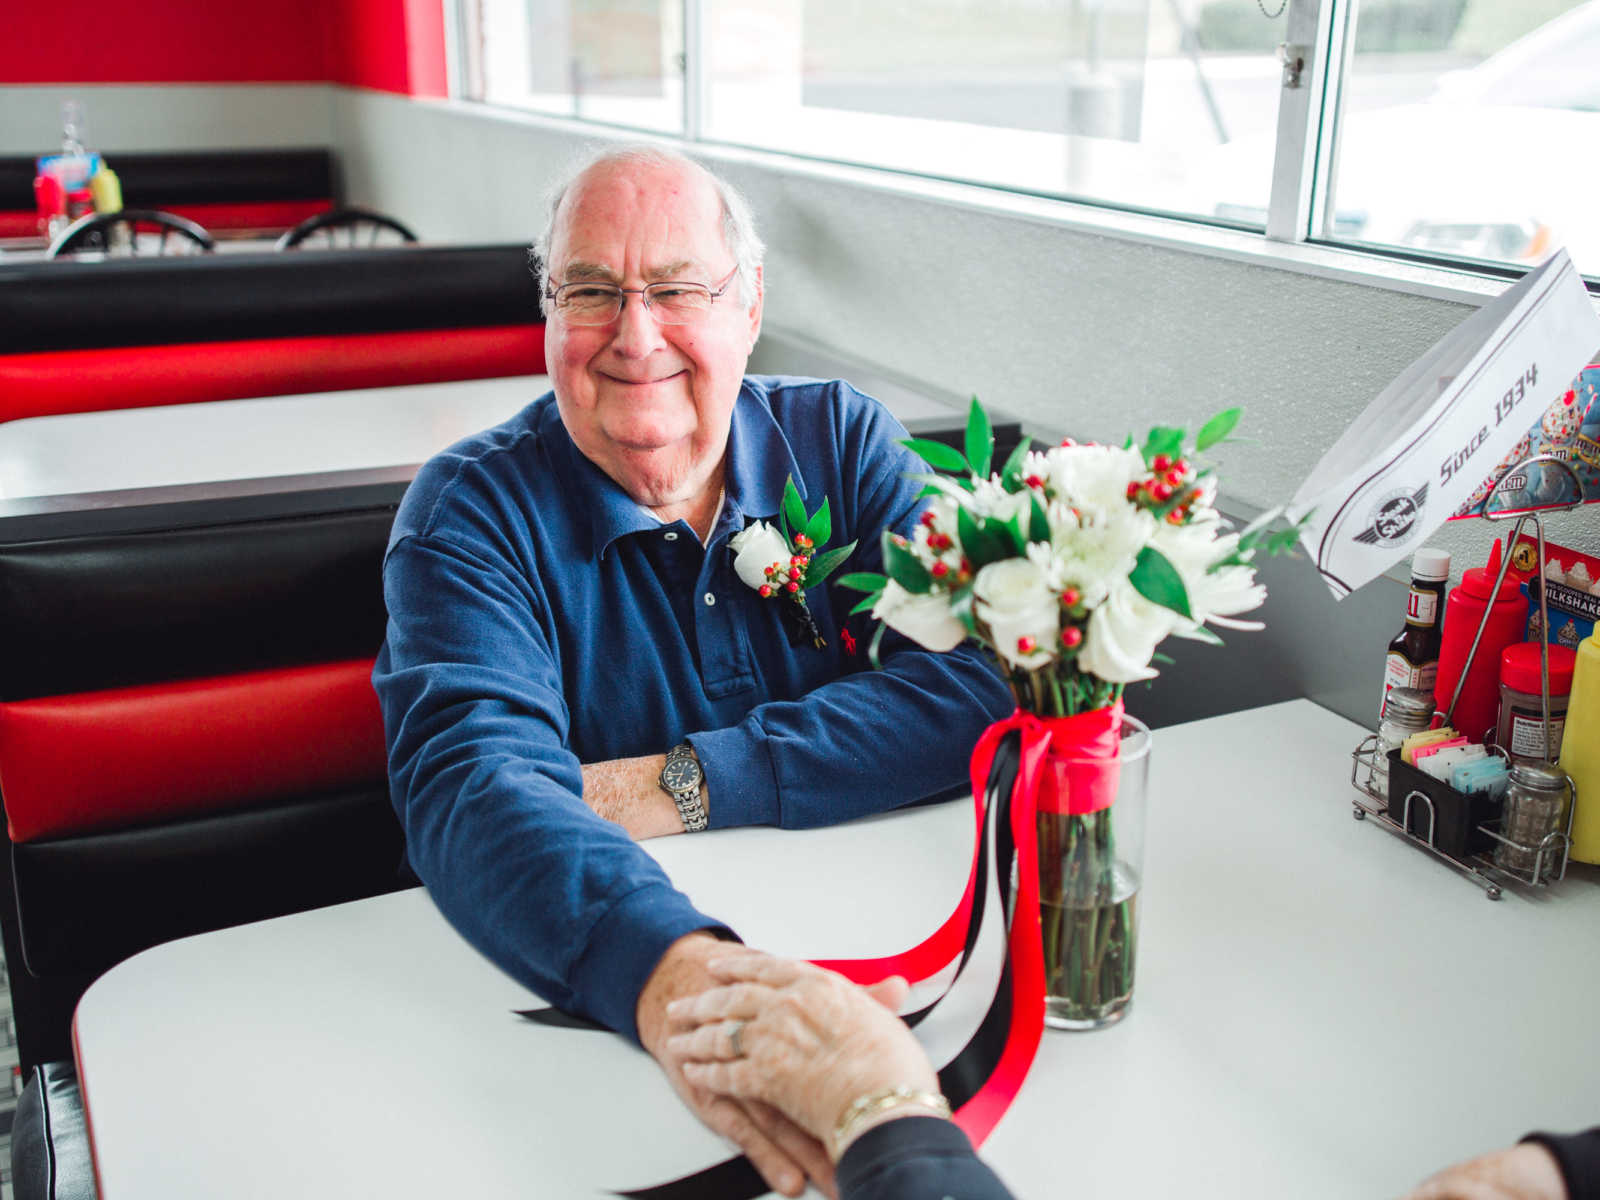 Husband smiles while holding hands with wife in Steak 'n Shake booth